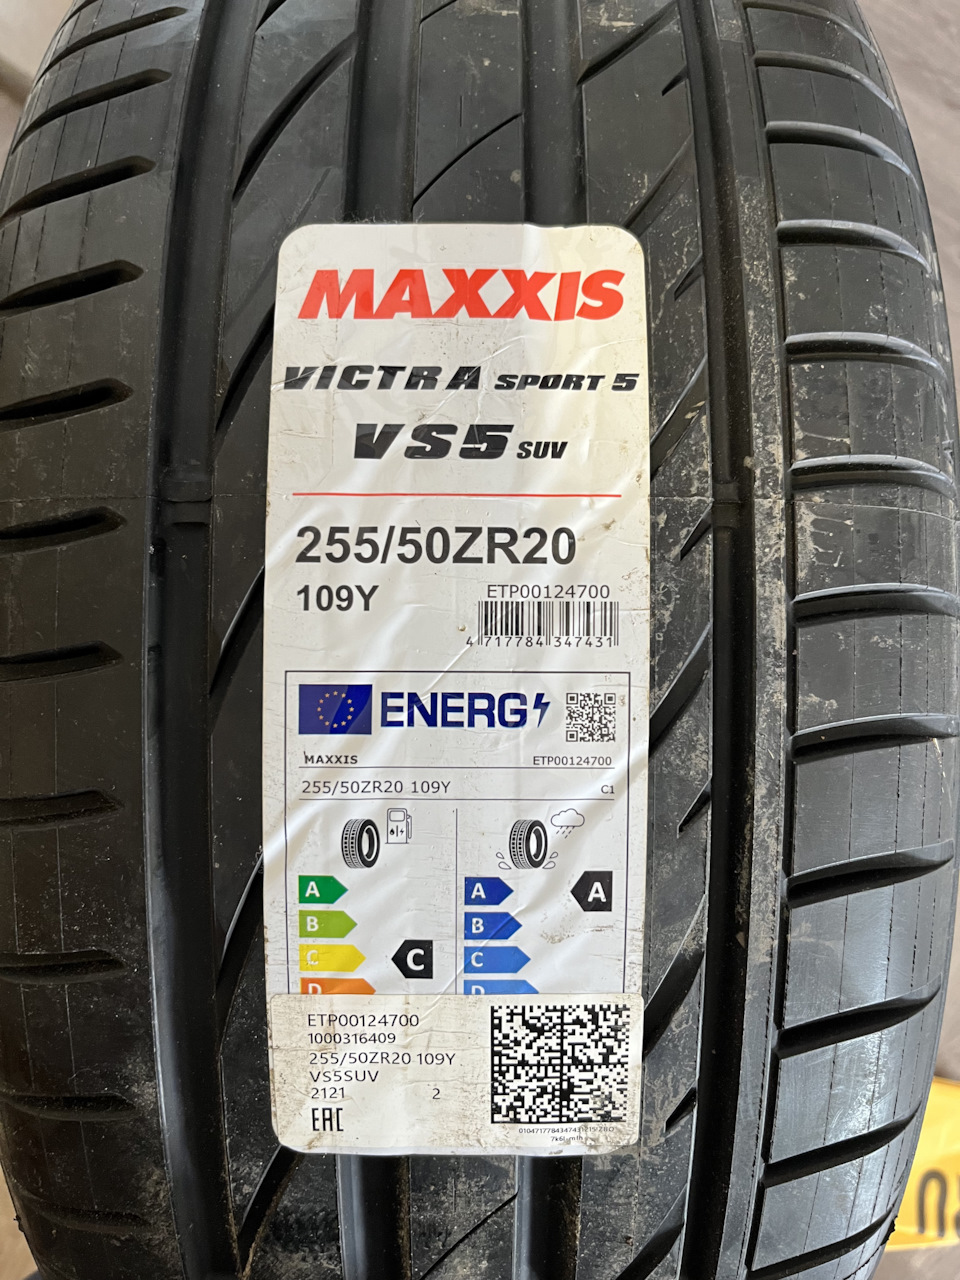 Maxxis Victra Sport 5. Максис vs5 Victra. Maxxis Victra Sport vs5. Maxxis Victra Sport 5 vs5. Шины maxxis victra sport отзывы